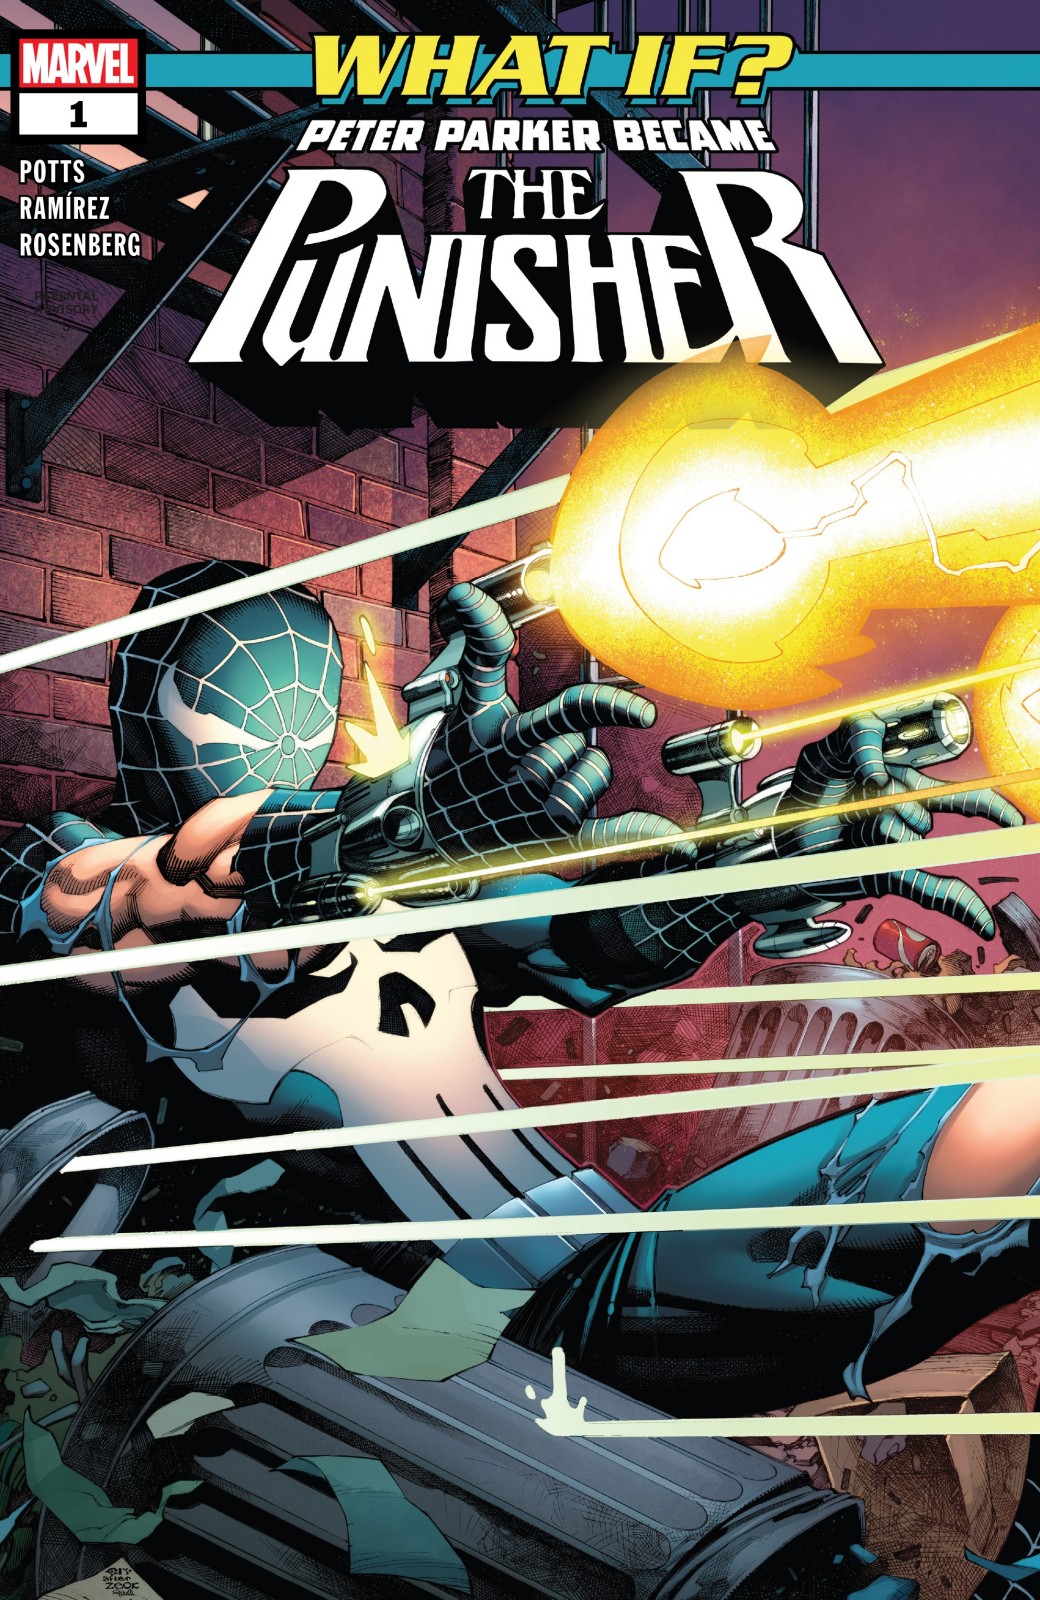 What If Peter Parker Became The Punisher #1